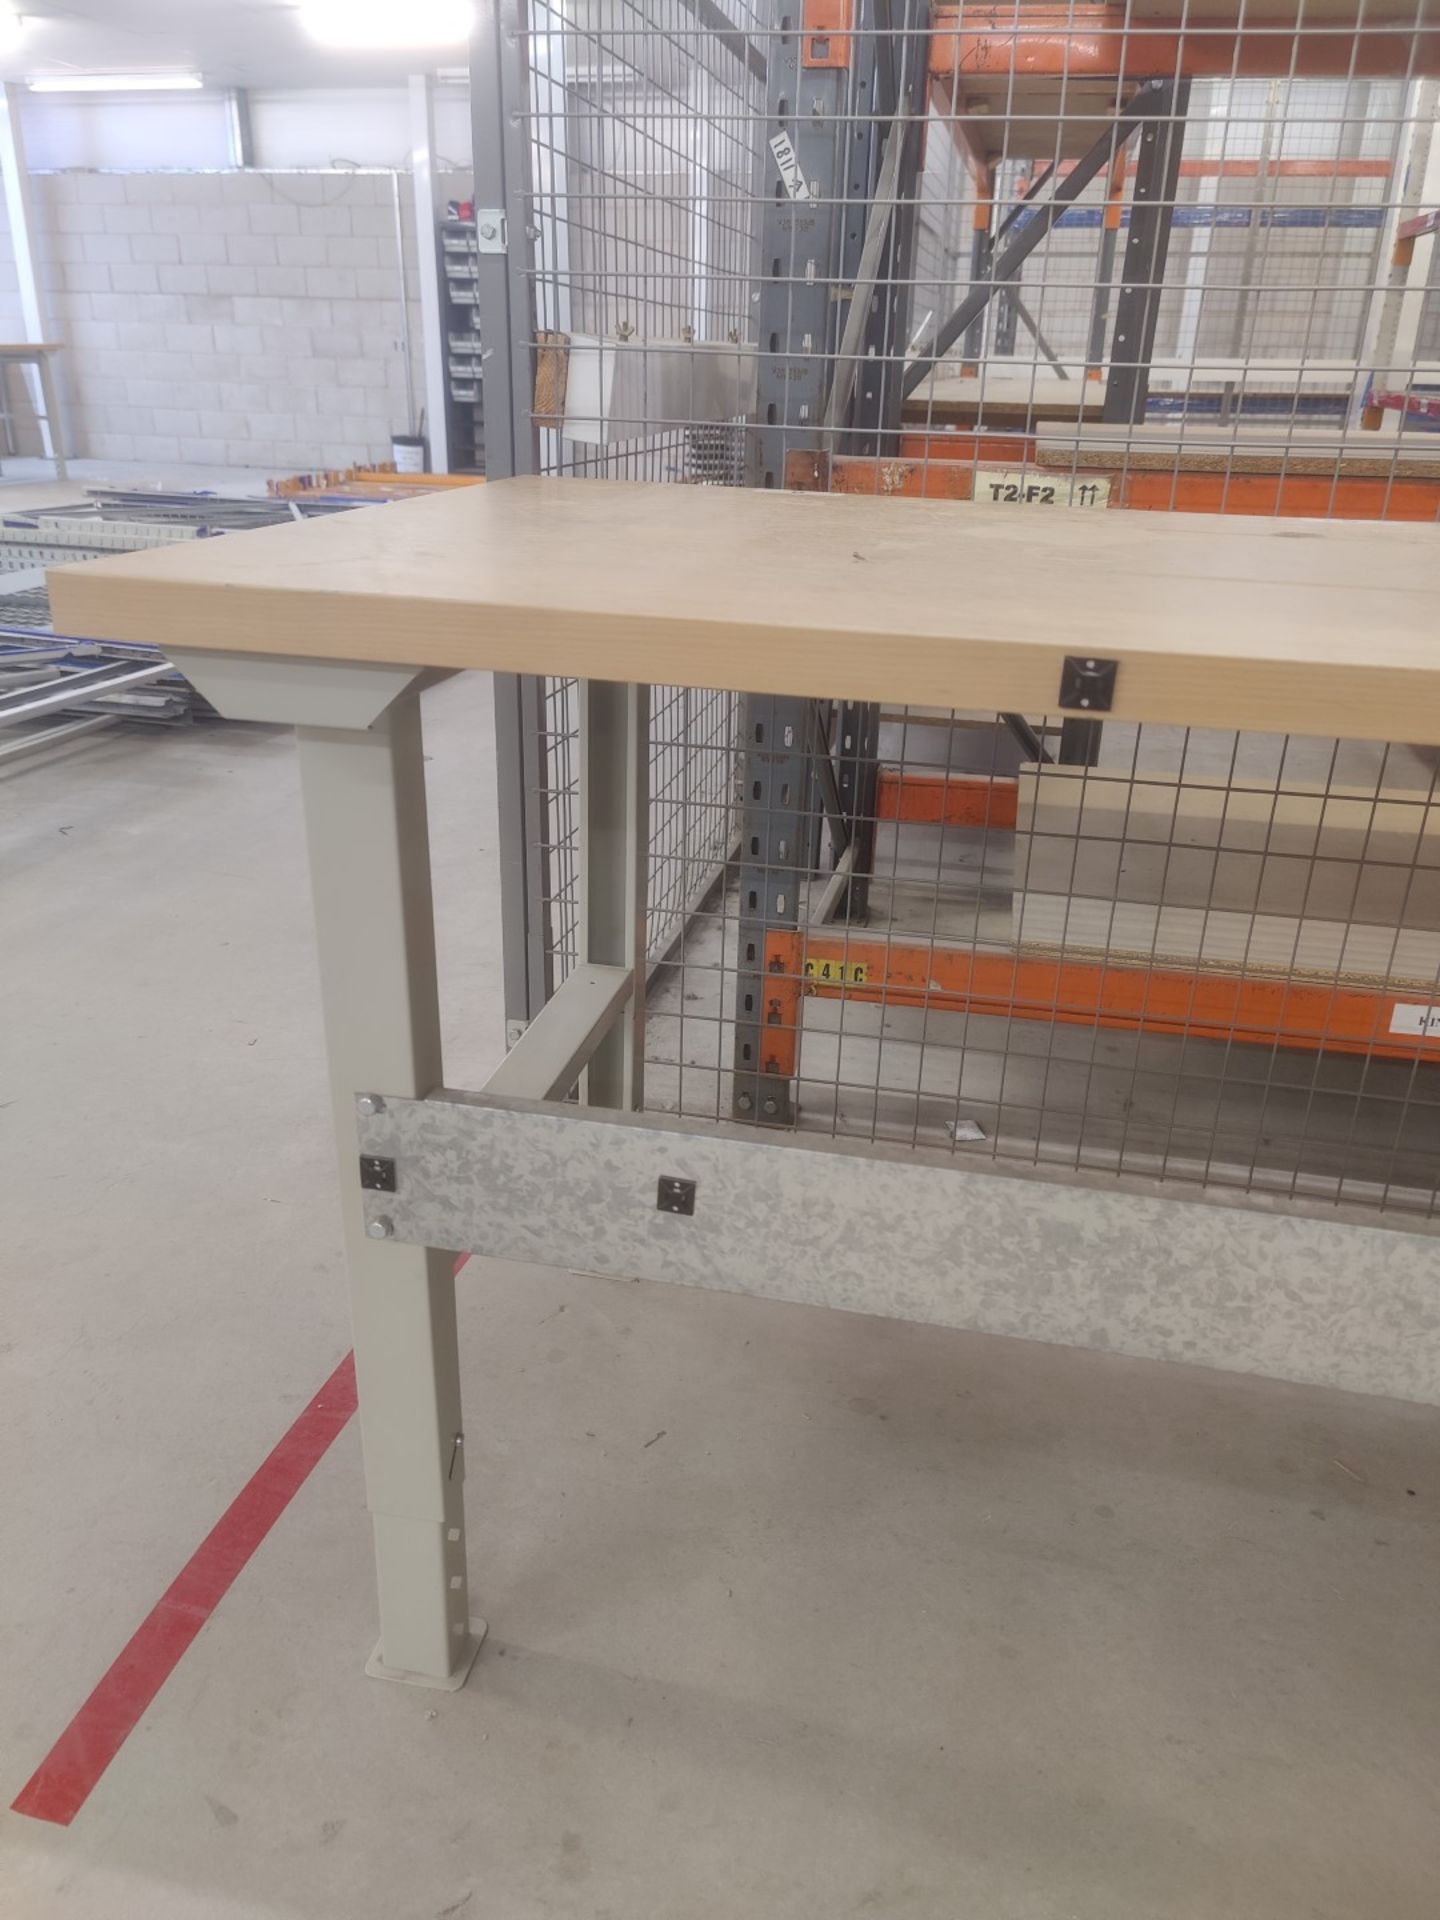 1 x Workbench With Height Adjustable Legs - Removed From a Computer Workshop - Size: W200 x D80 cms - Image 4 of 6